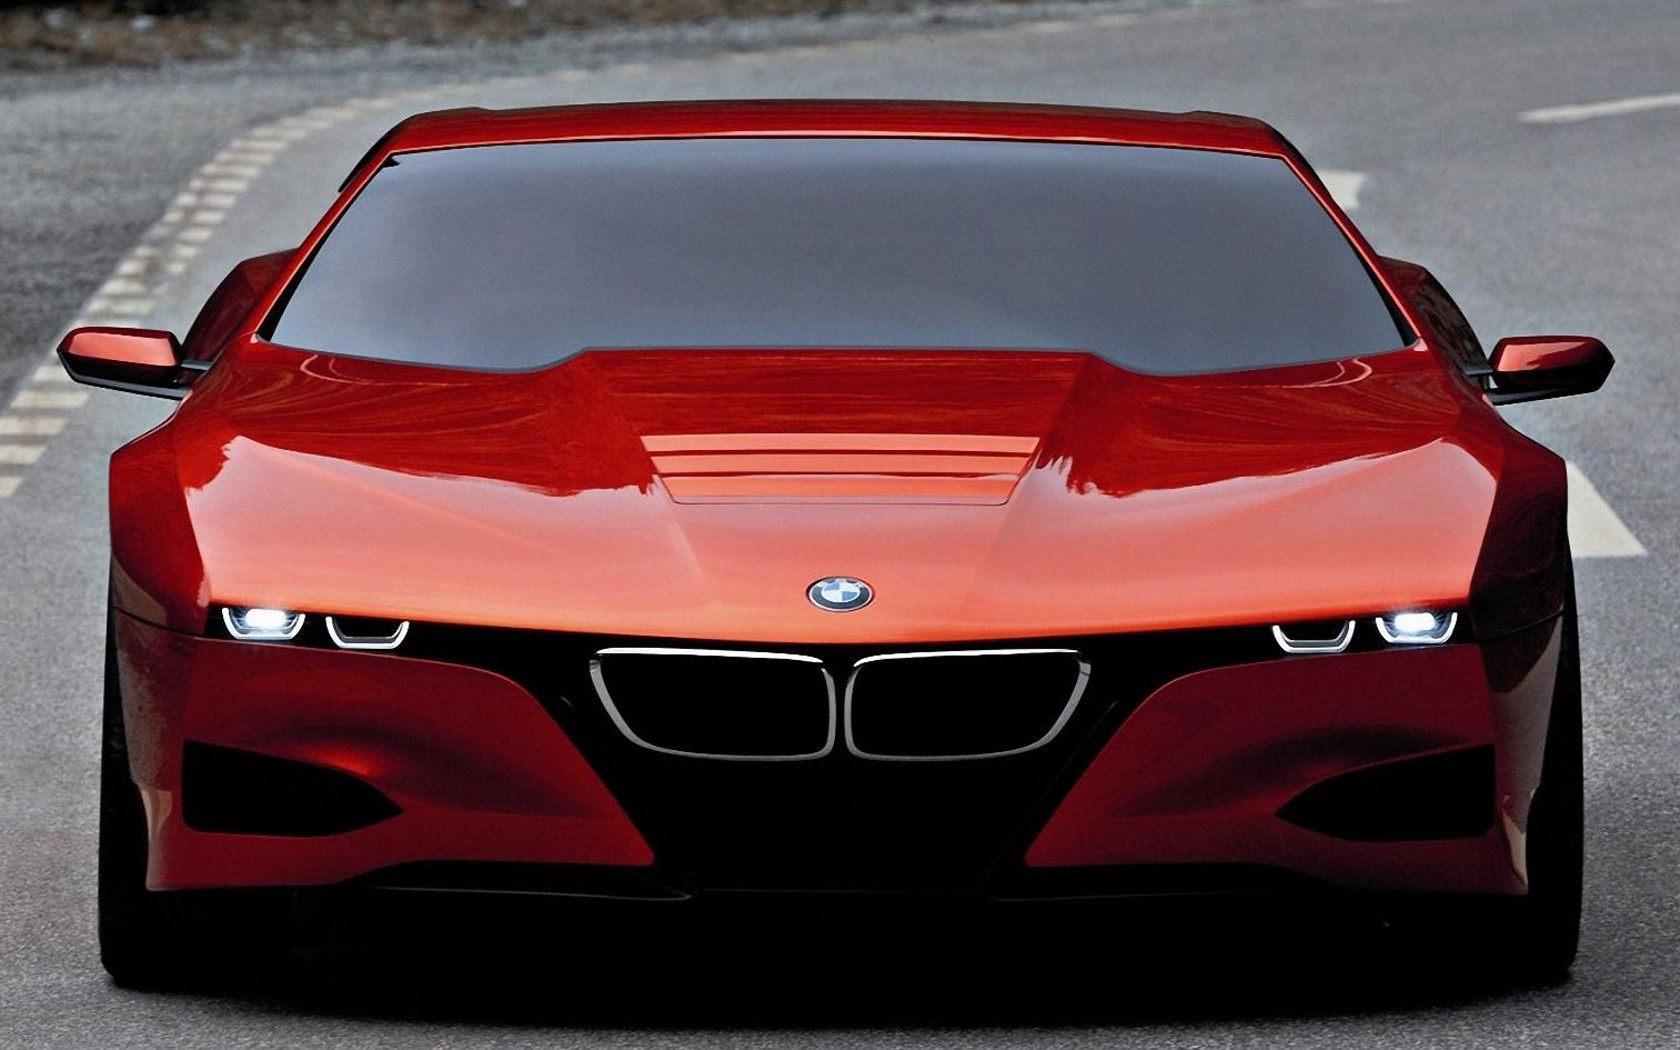 bmw, Futuristic, Concept, Art, Concept, Cars, Sports, Cars, Orange, Cars,  Bmw, M1, Future, Cars Wallpapers HD / Desktop and Mobile Backgrounds